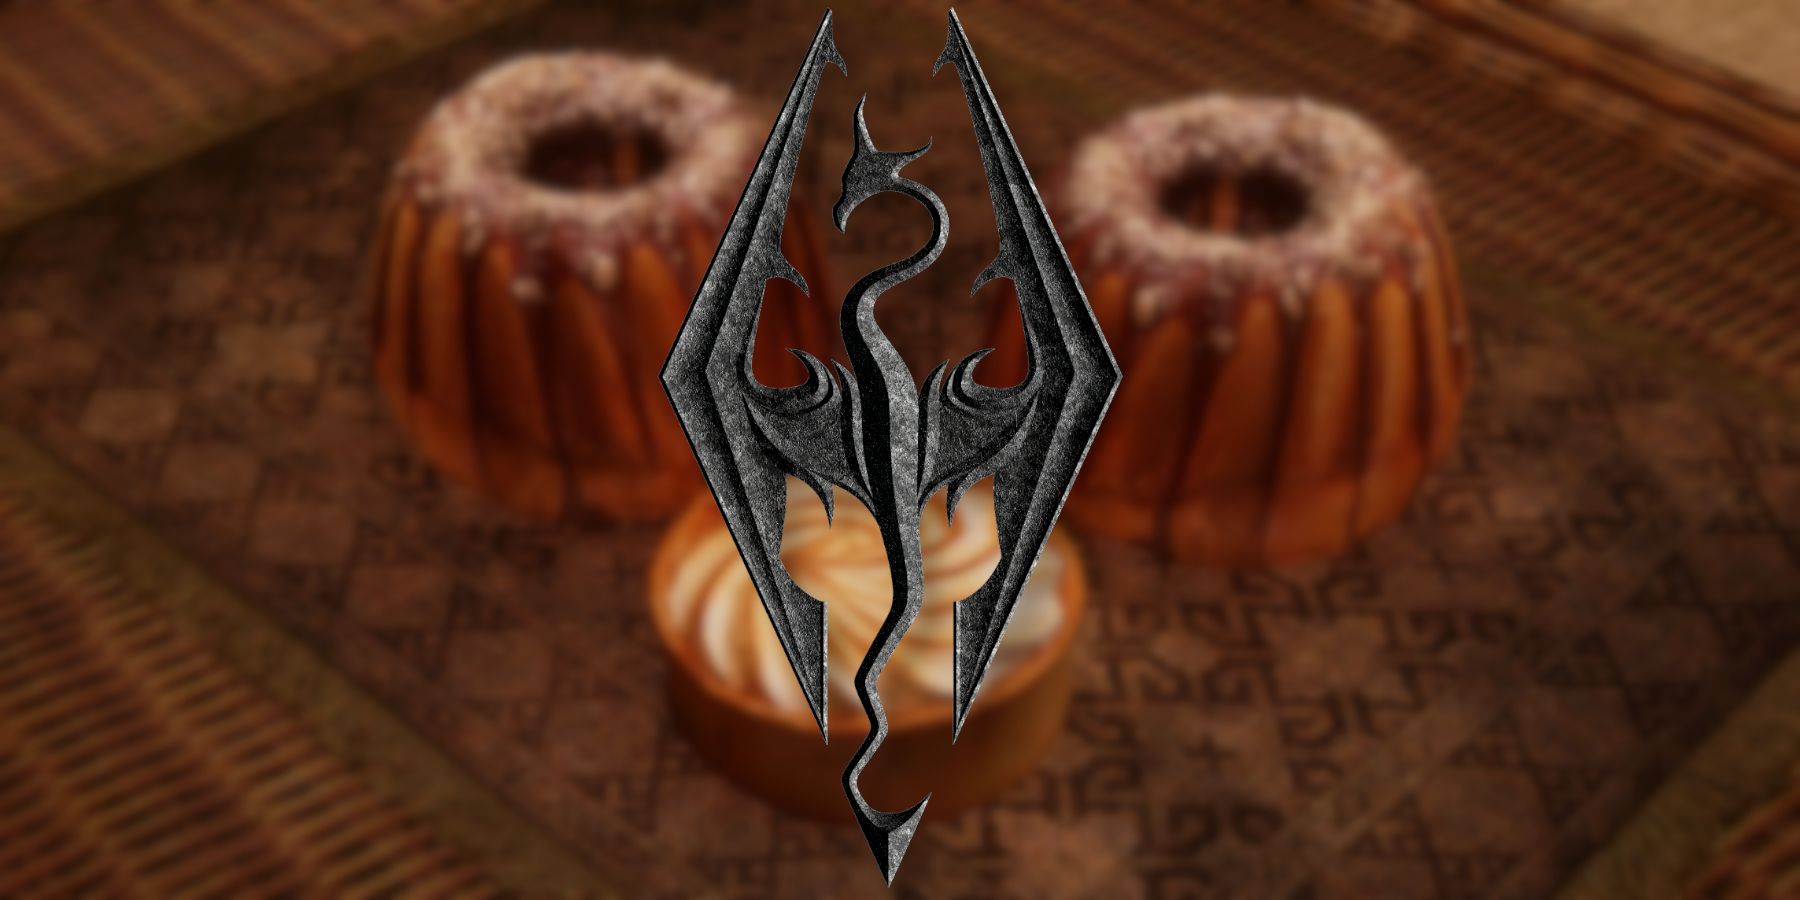 Image showing some sweetrolls on a table with the Skyrim logo in front of them.